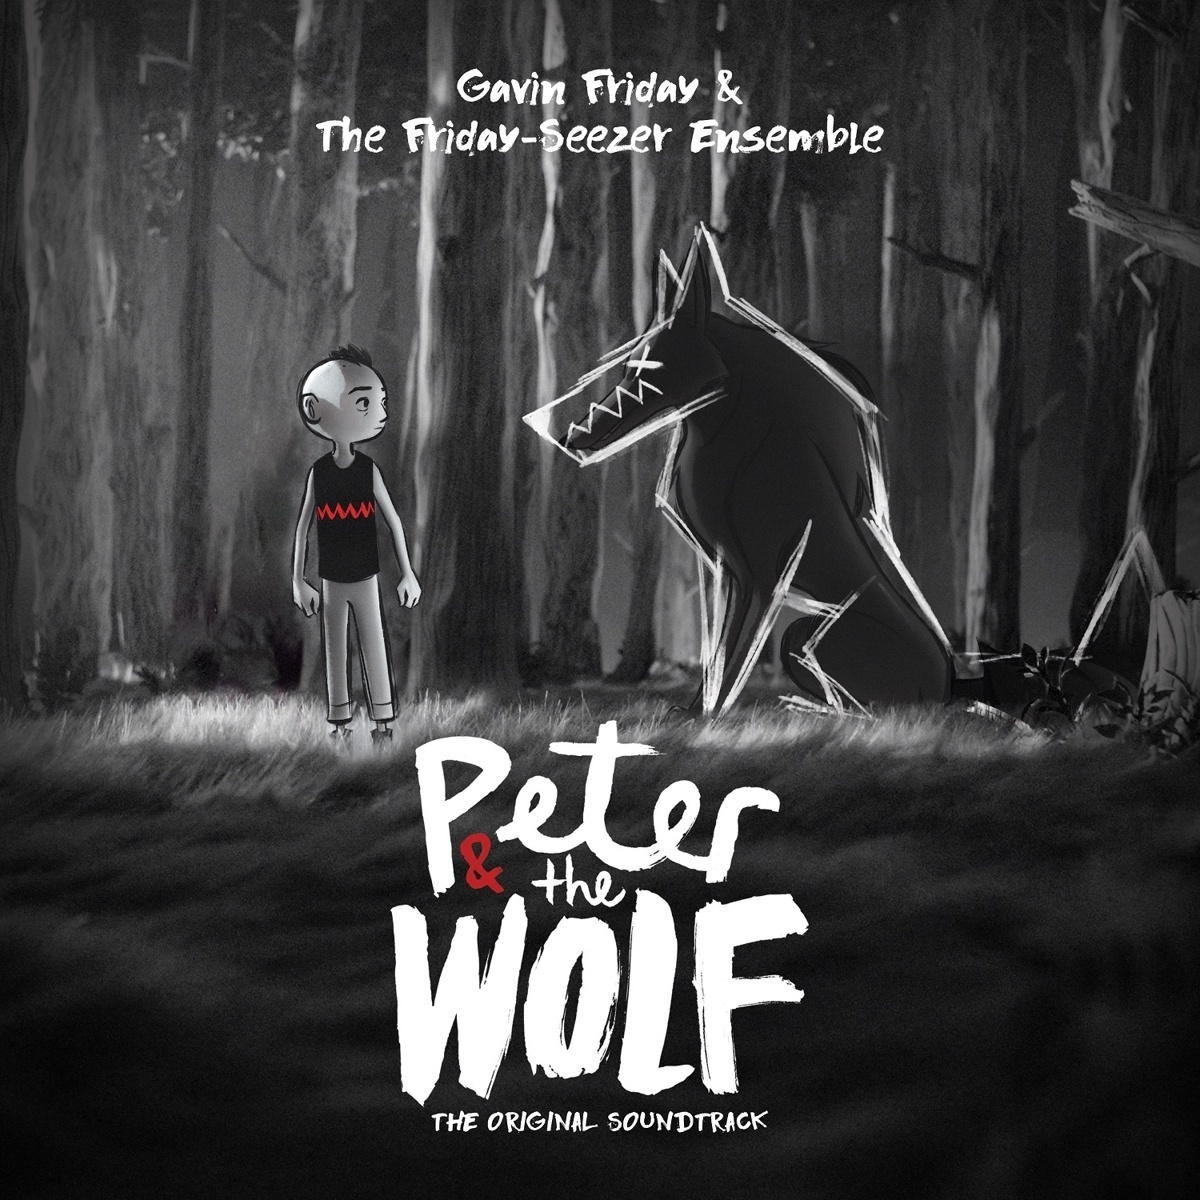 Peter And The Wolf - Ost  Gavin Friday & The Friday-Seezer Ensemble. (CD)